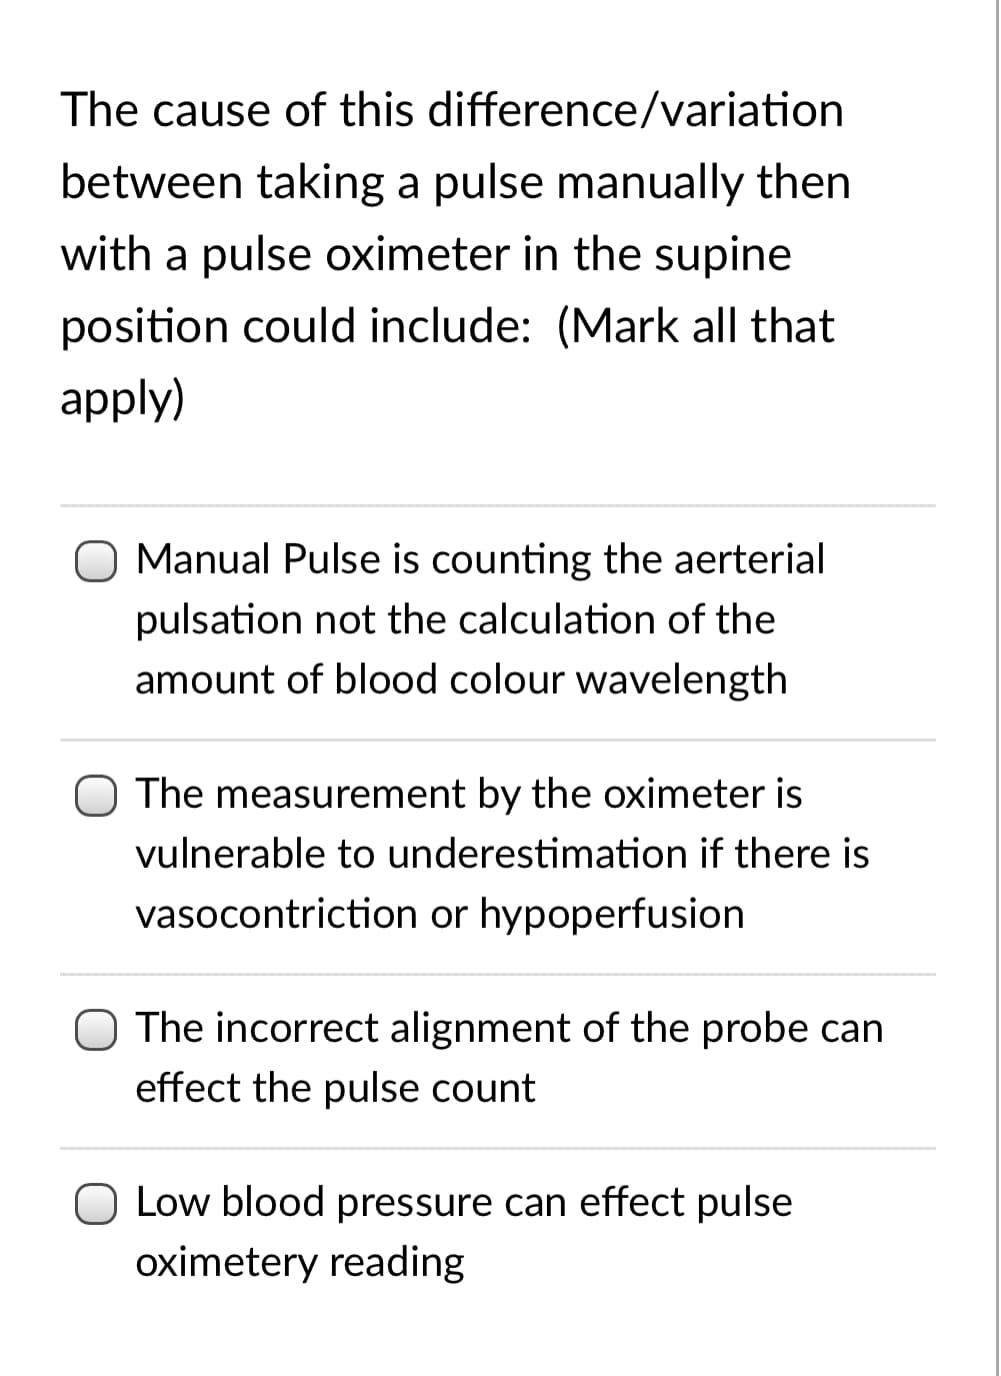 The cause of this difference/variation
between taking a pulse manually then
with a pulse oximeter in the supine
position could include: (Mark all that
apply)
Manual Pulse is counting the aerterial
pulsation not the calculation of the
amount of blood colour wavelength
The measurement by the oximeter is
vulnerable to underestimation if there is
vasocontriction or hypoperfusion
O The incorrect alignment of the probe can
effect the pulse count
O Low blood pressure can effect pulse
oximetery reading
